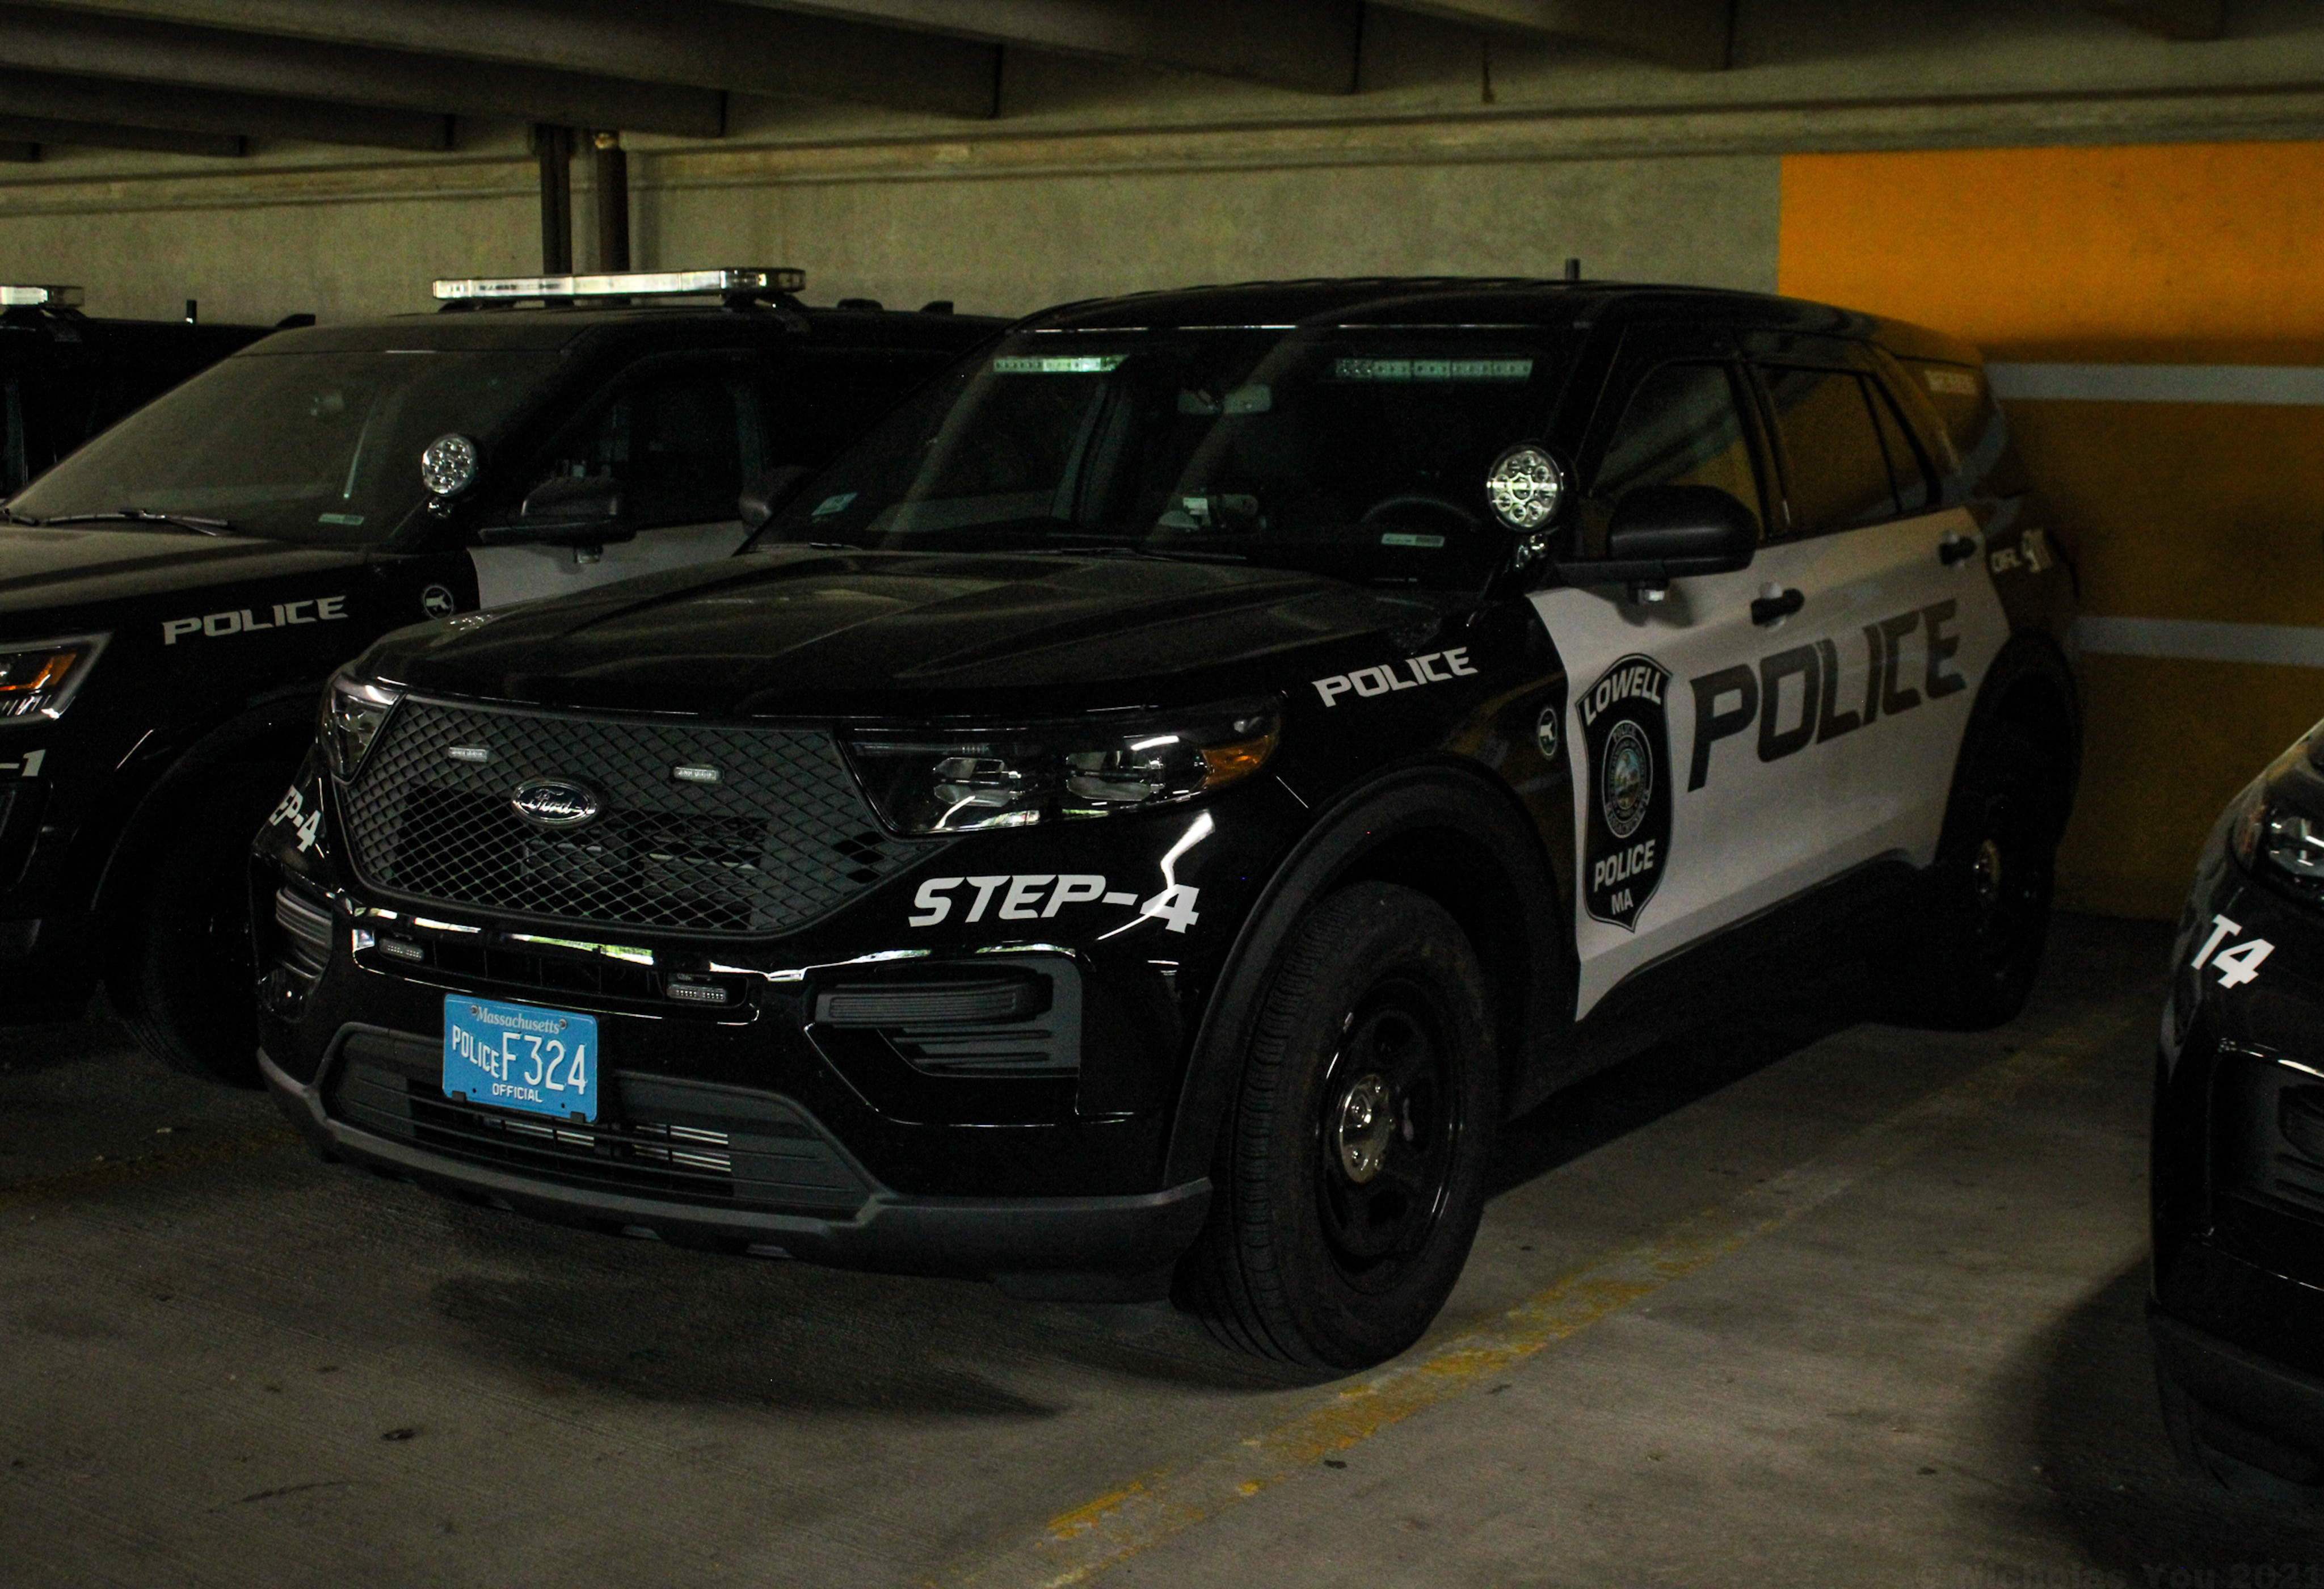 A photo  of Lowell Police
            STEP-4, a 2020 Ford Police Interceptor Utility             taken by Nicholas You